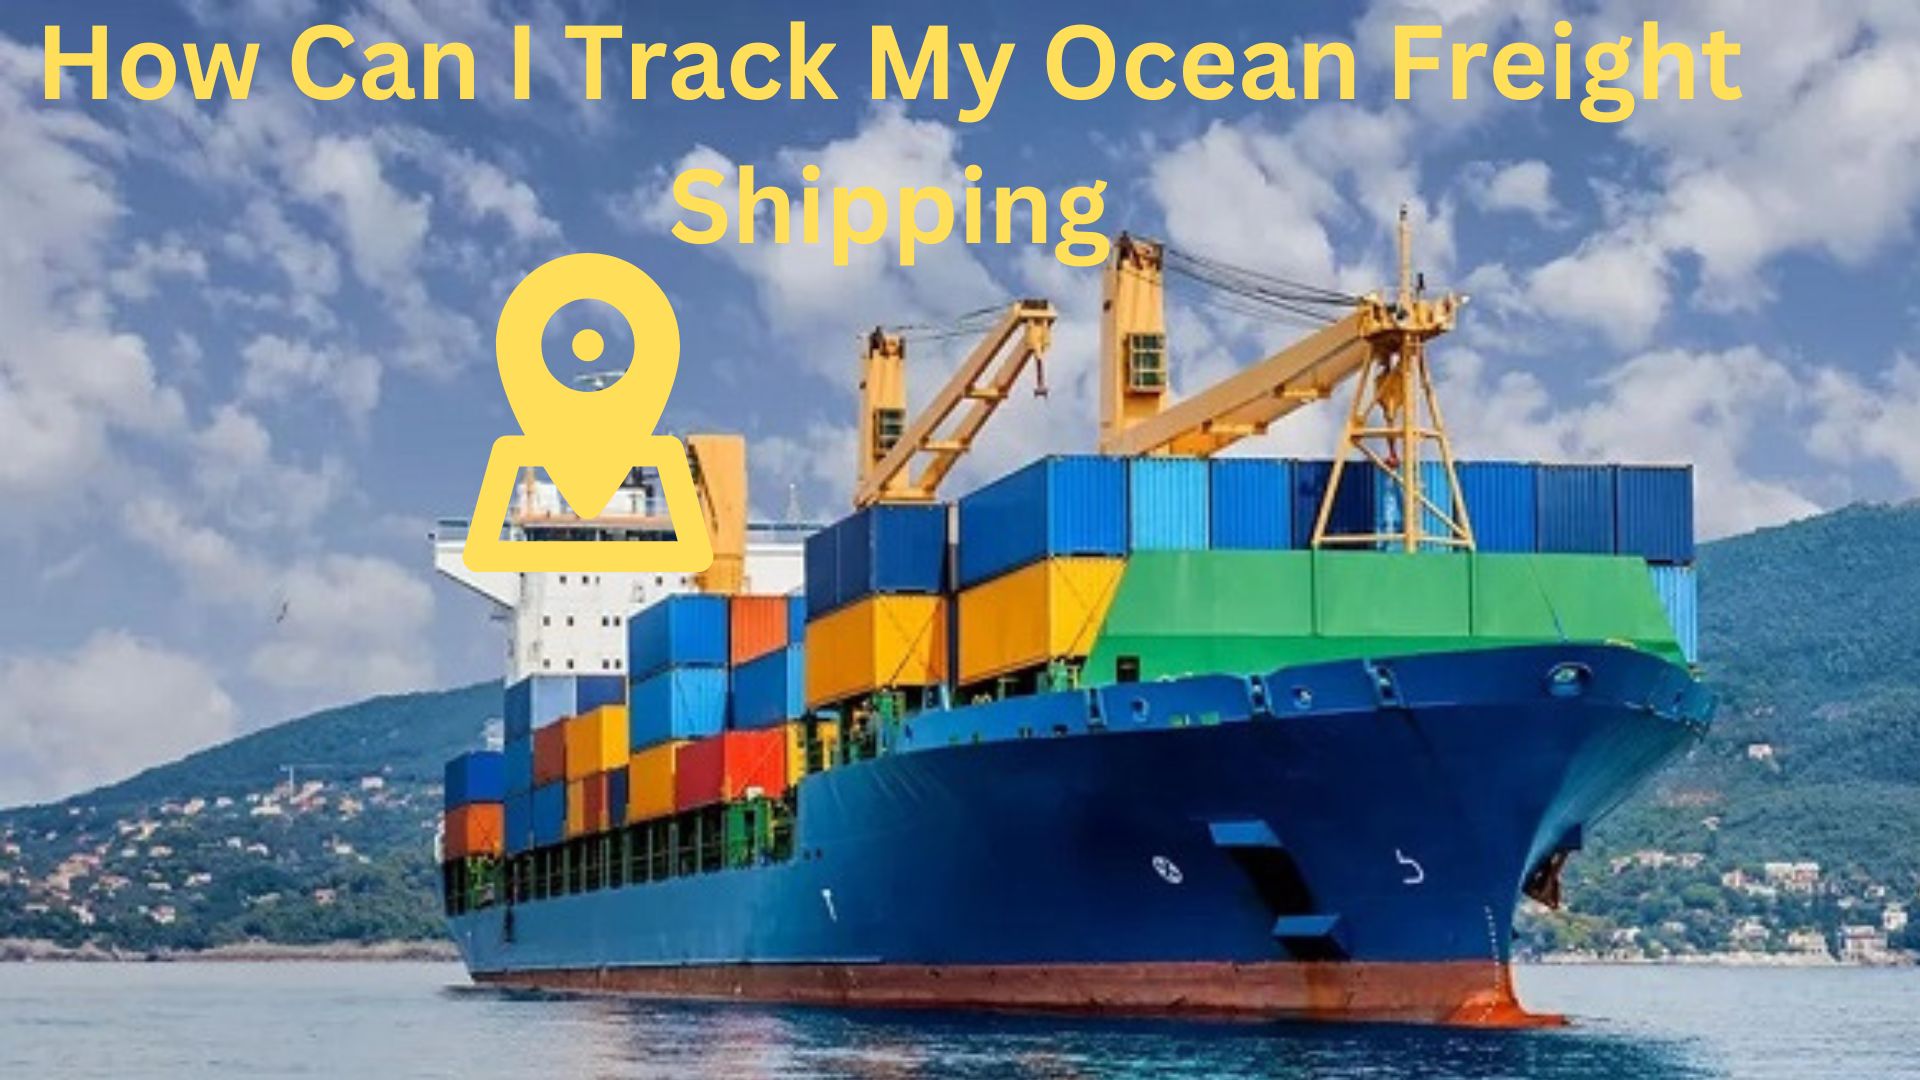 How Can I Track My Ocean Freight Shipping